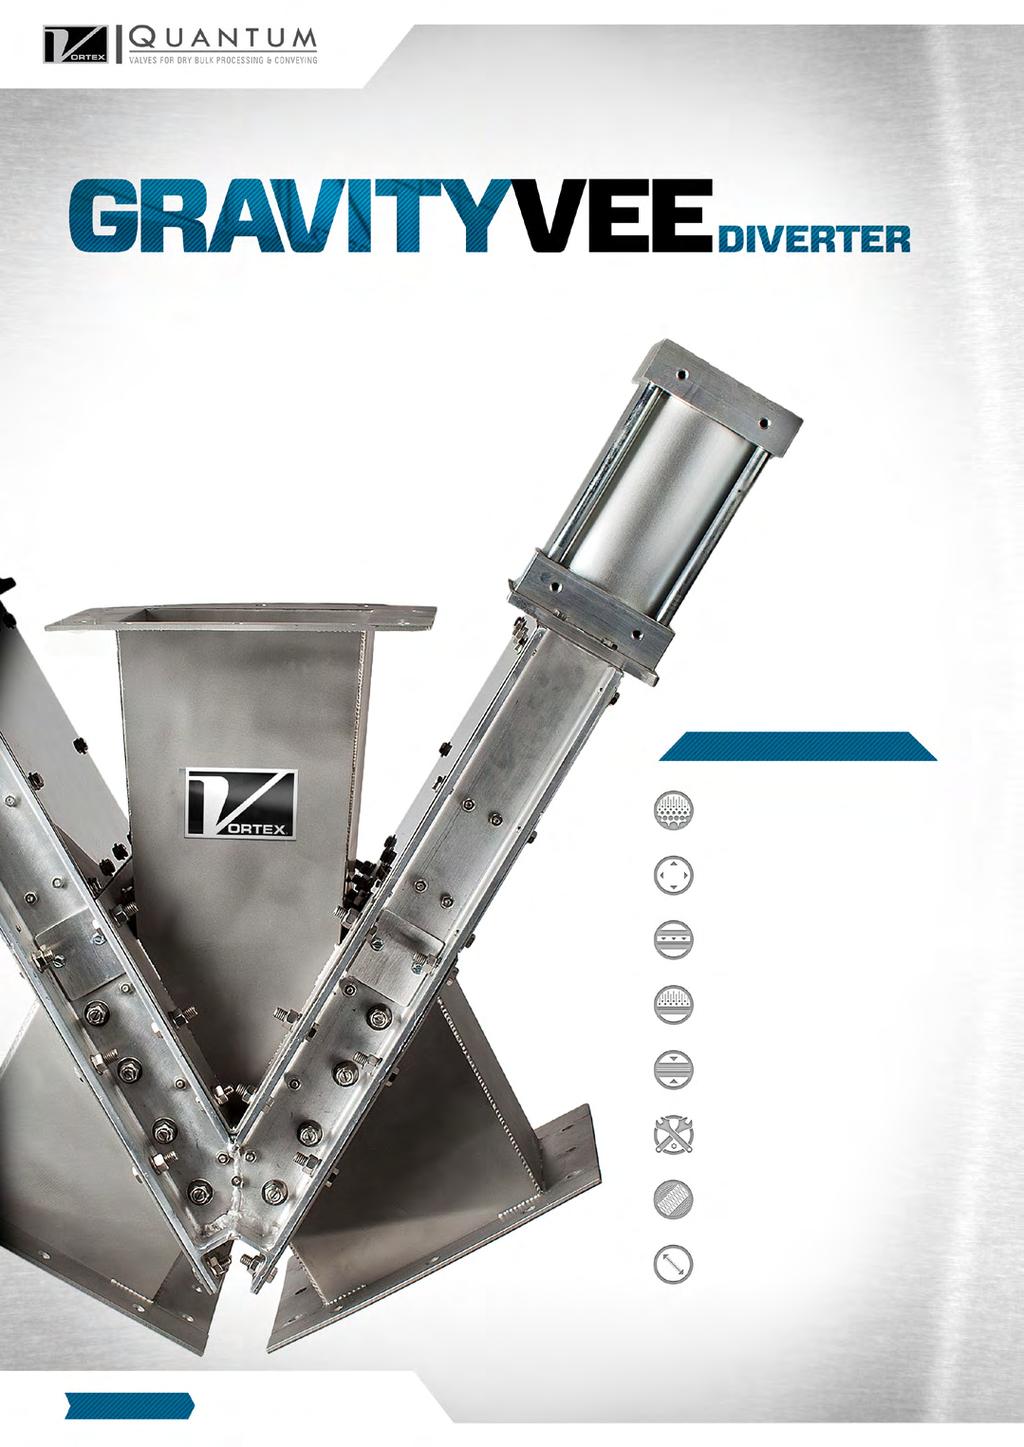 The Vortex Gravity Vee Diverter is designed to divert dry bulk solids in gravity flow conveying systems.